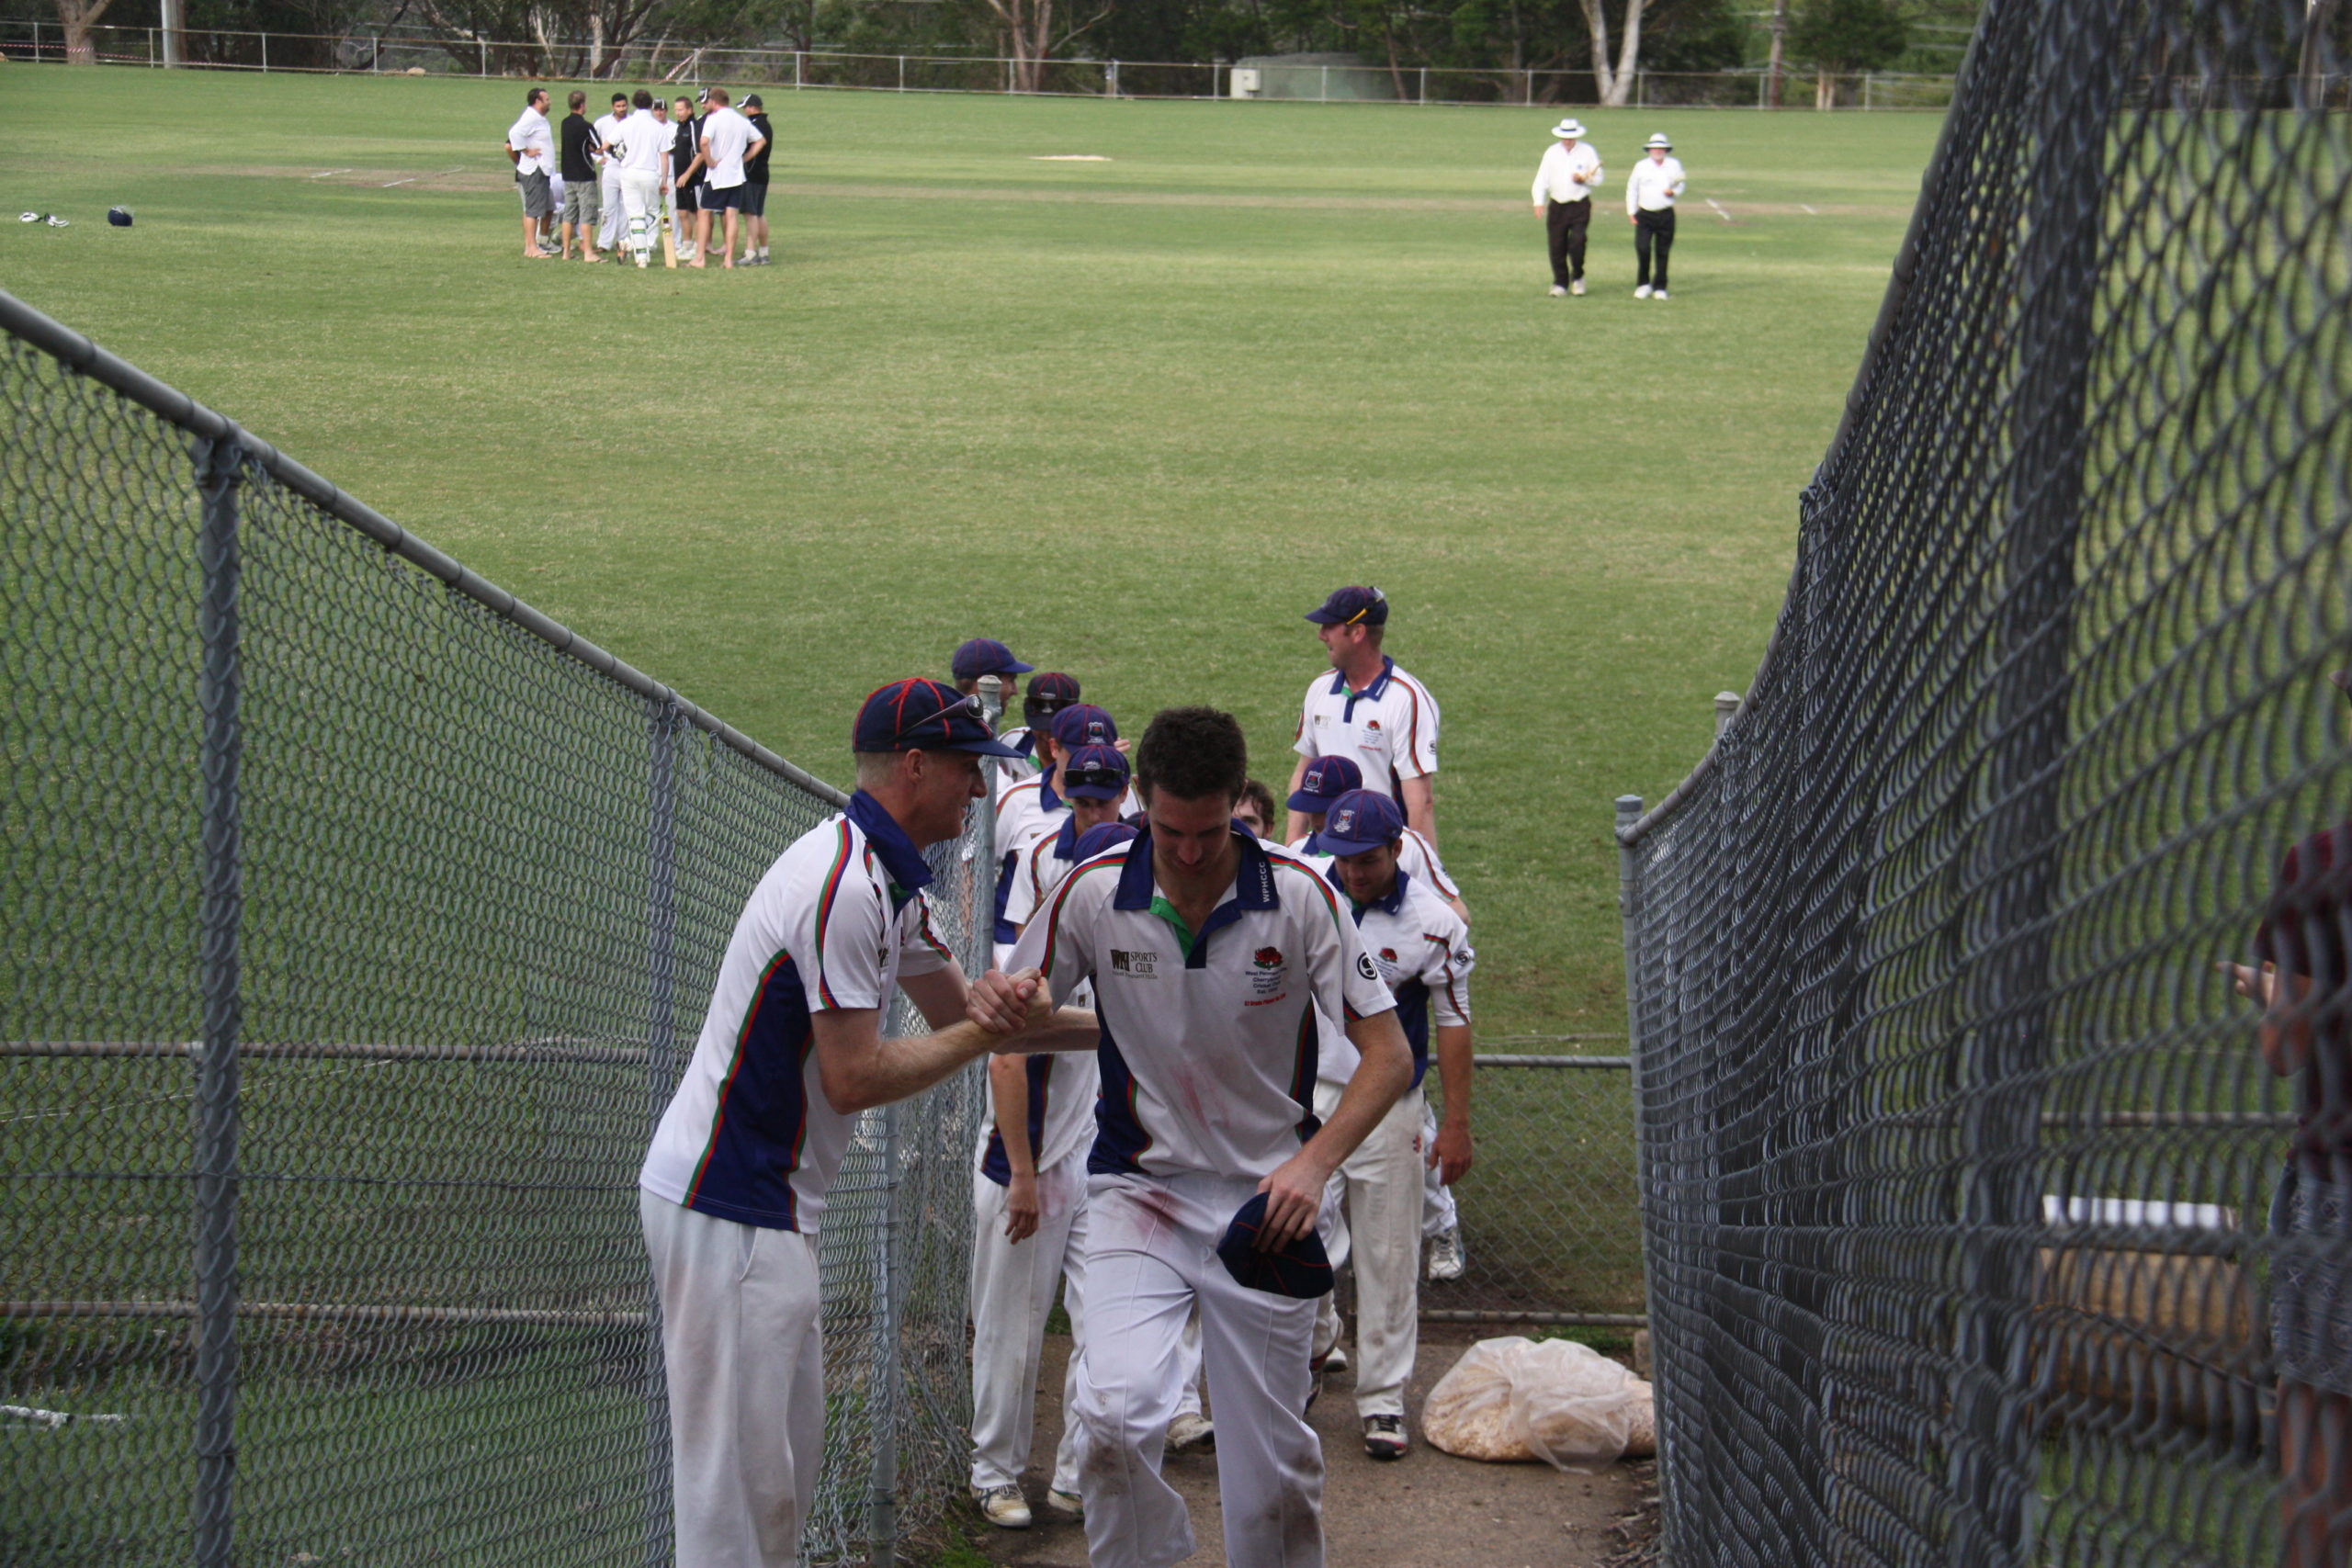 A1 Grand Final (Rofie 3) Vs ARL. James Makin shaking hands with Scott Henderson - Parklands Oval 30th March 2014.